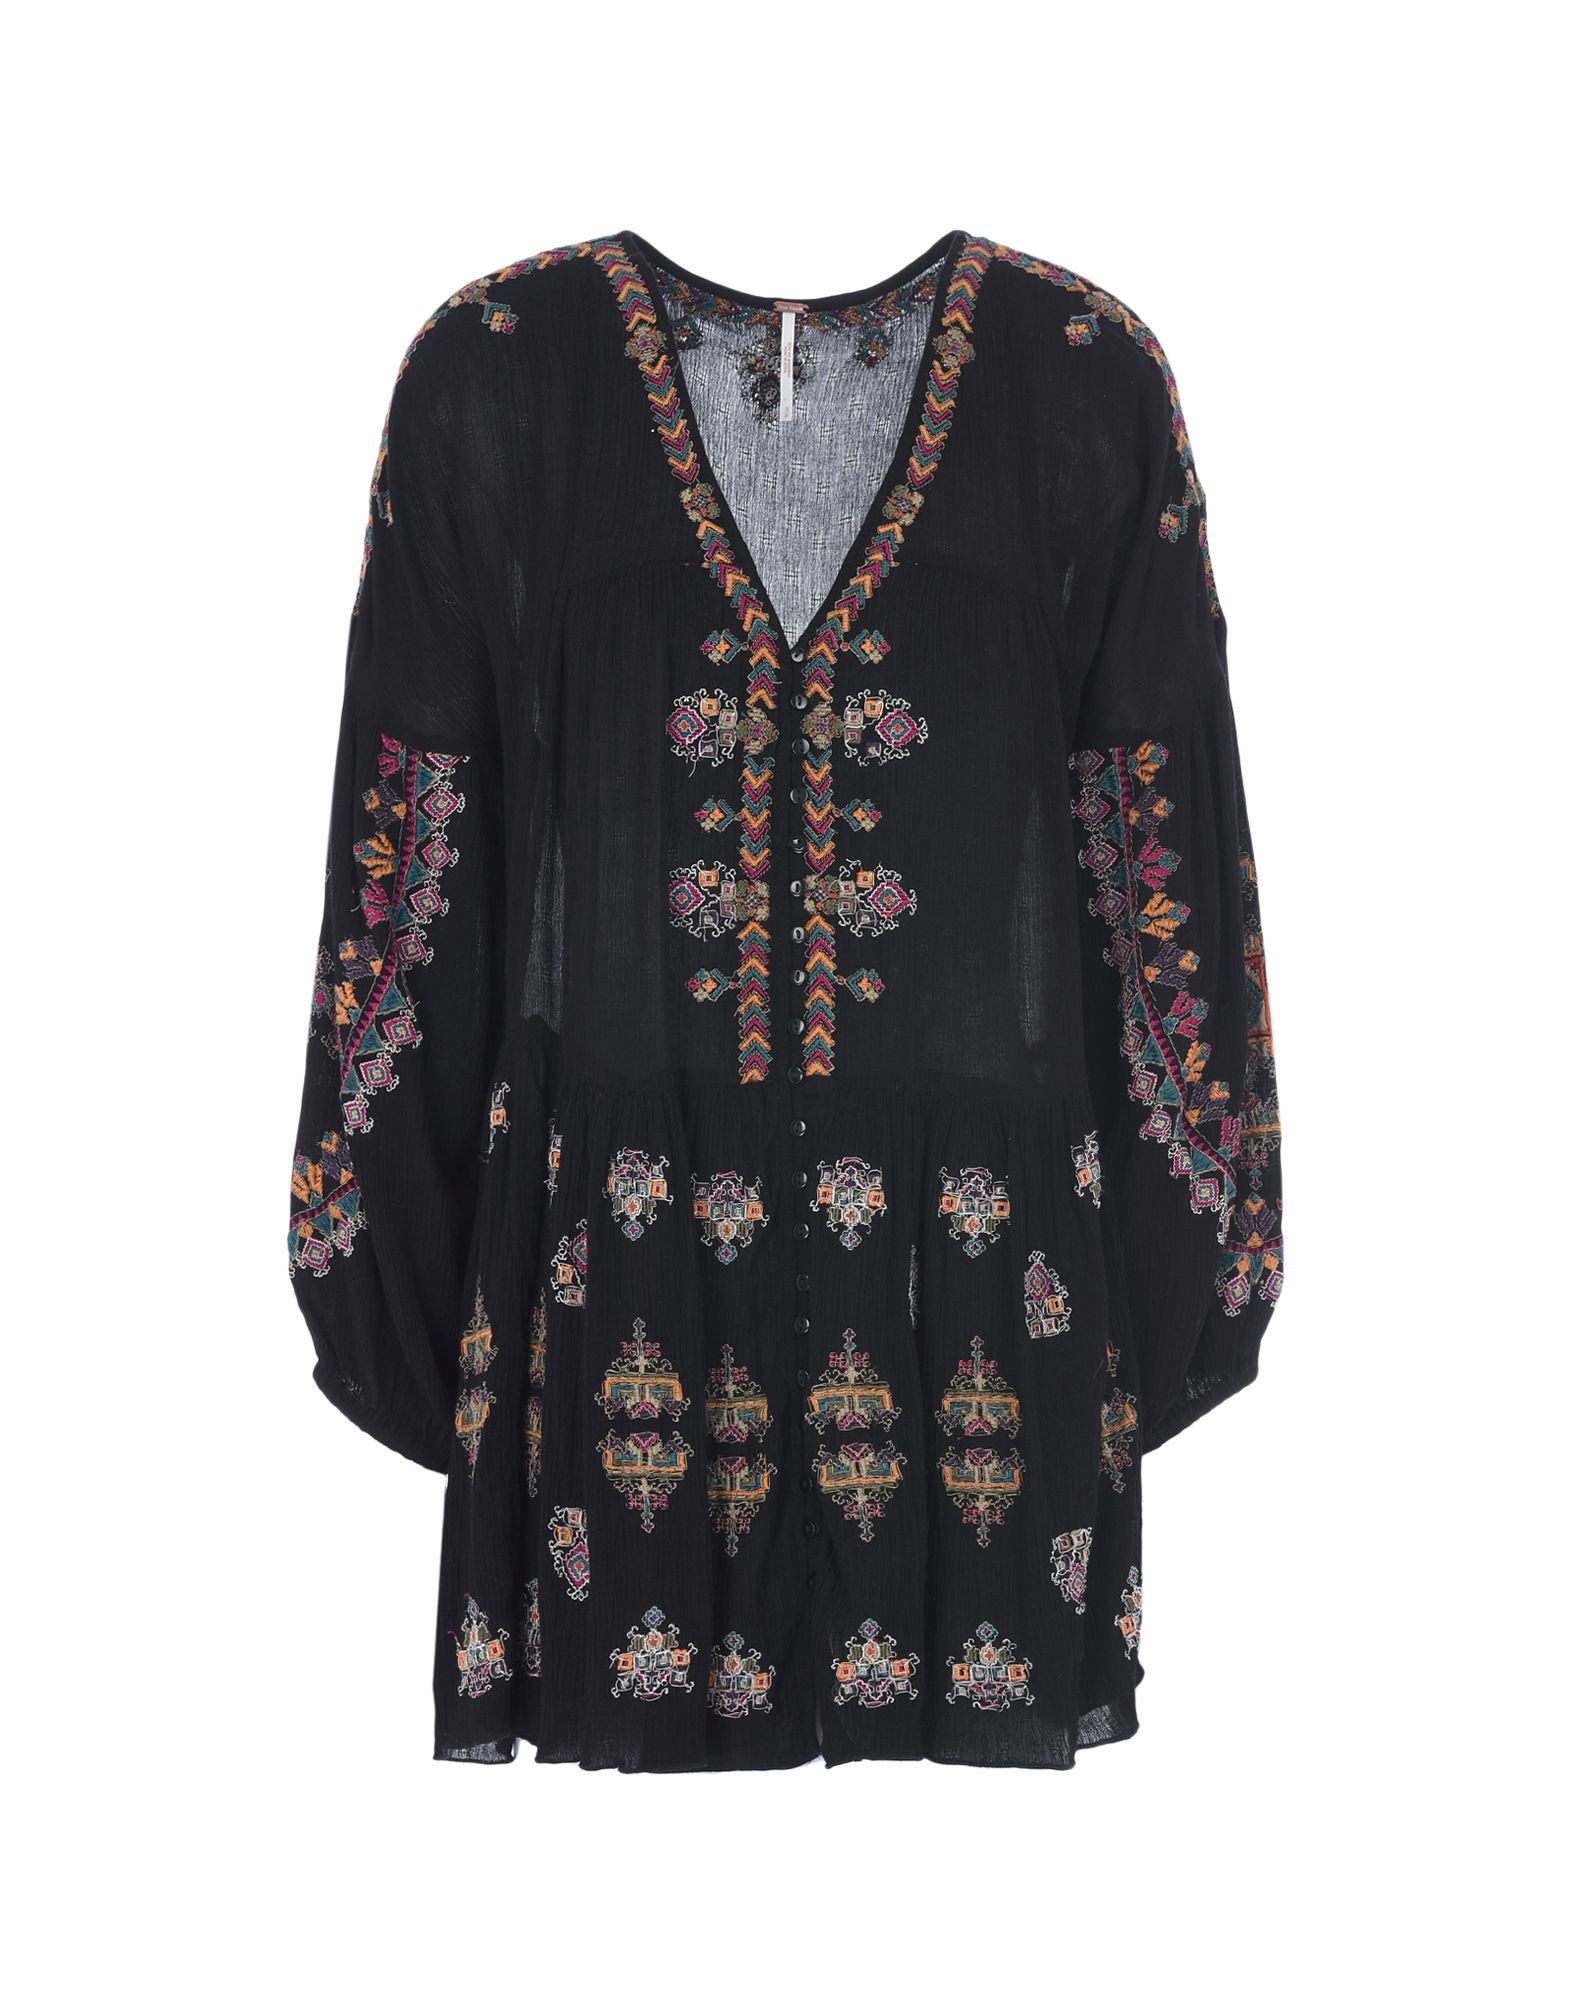 FREE PEOPLE Blouse,38755731DD 3